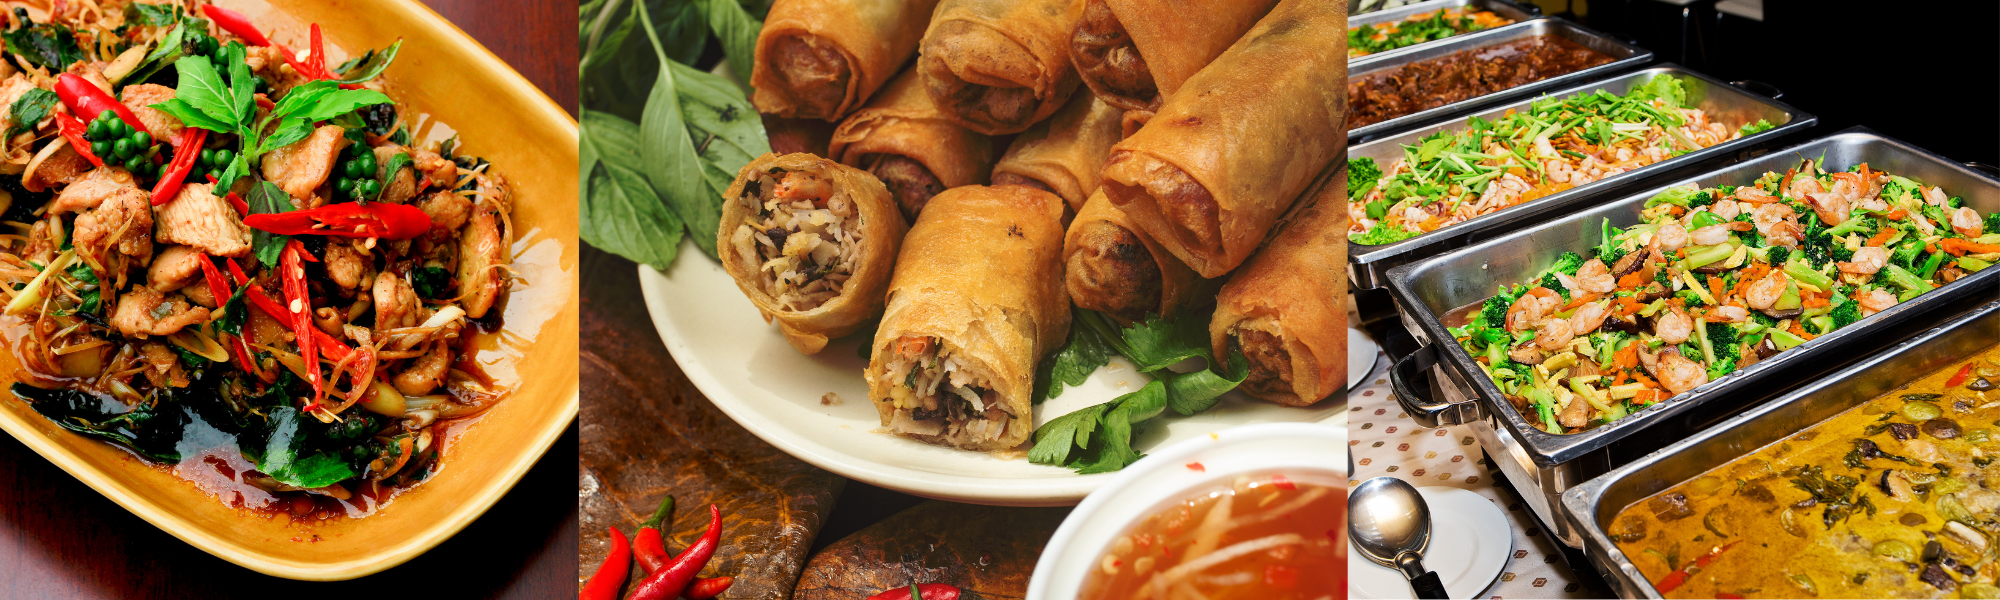 amazing catering cuisines including eggrolls and stir-fry 